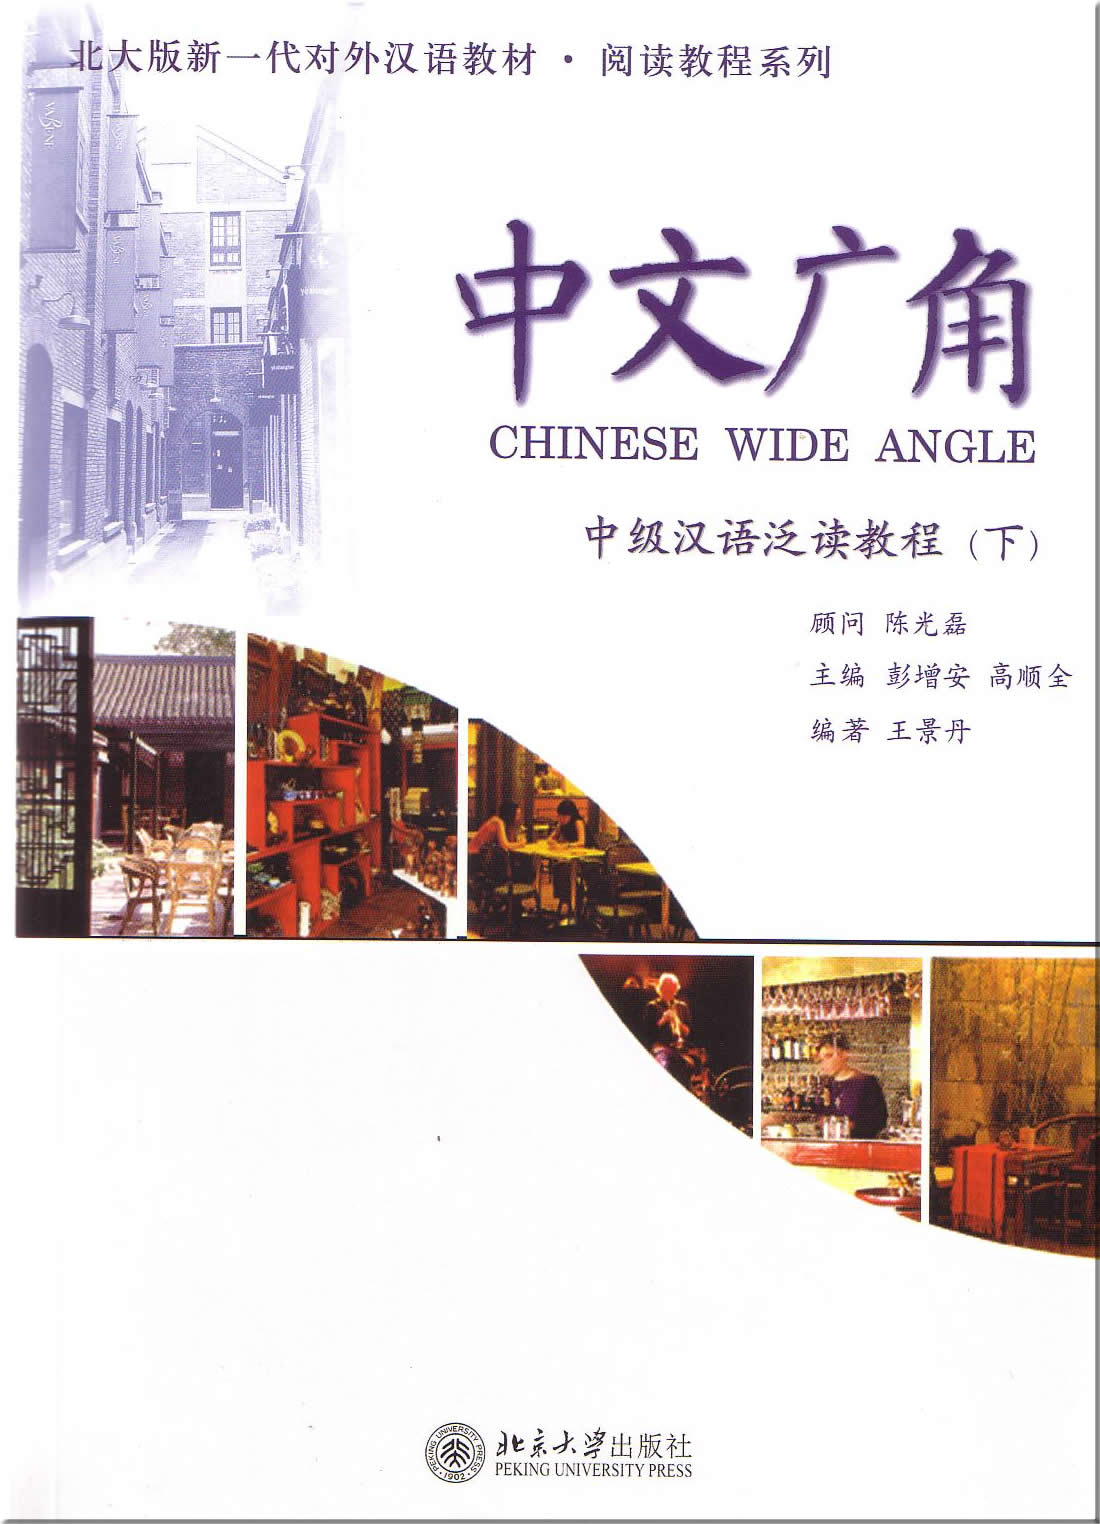 Chinese Wide Angle - Reading Intermediate level II) + 3CDs<br>ISBN:7-301-09778-6, 7301097786, 9787301097786